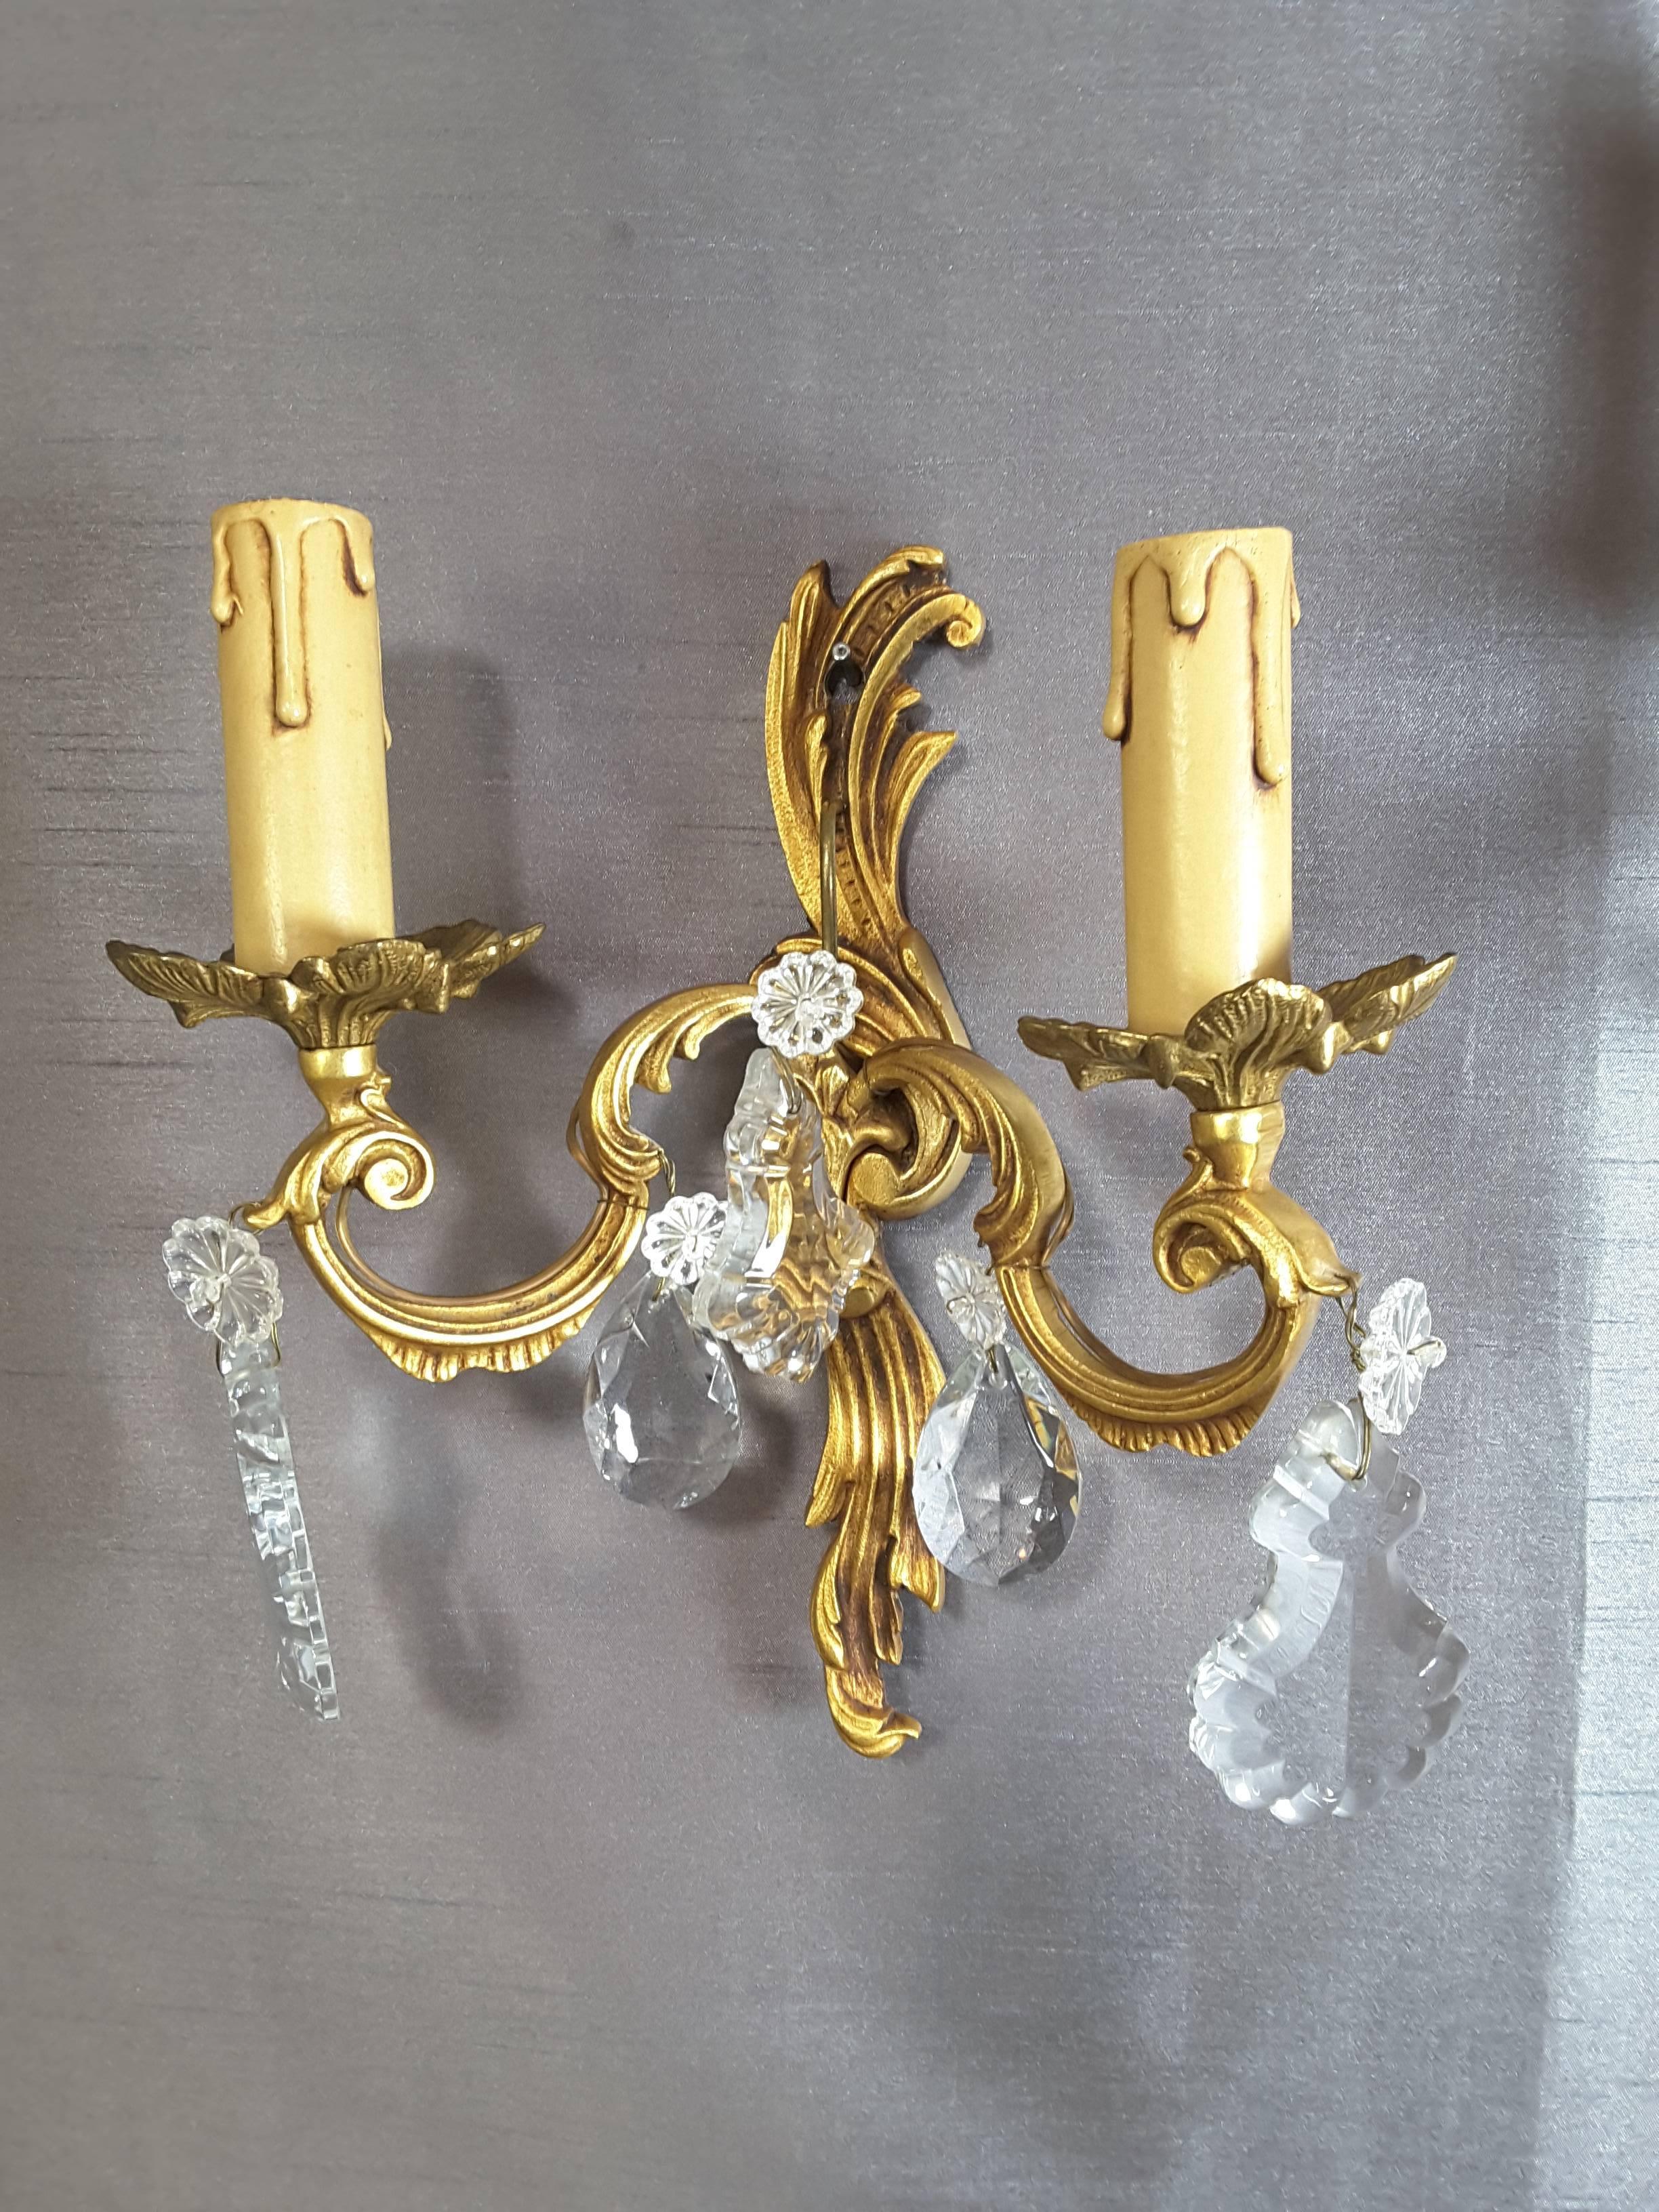 Regency Pair of Brass/Gilt Wall Sconces with Floral Crystals